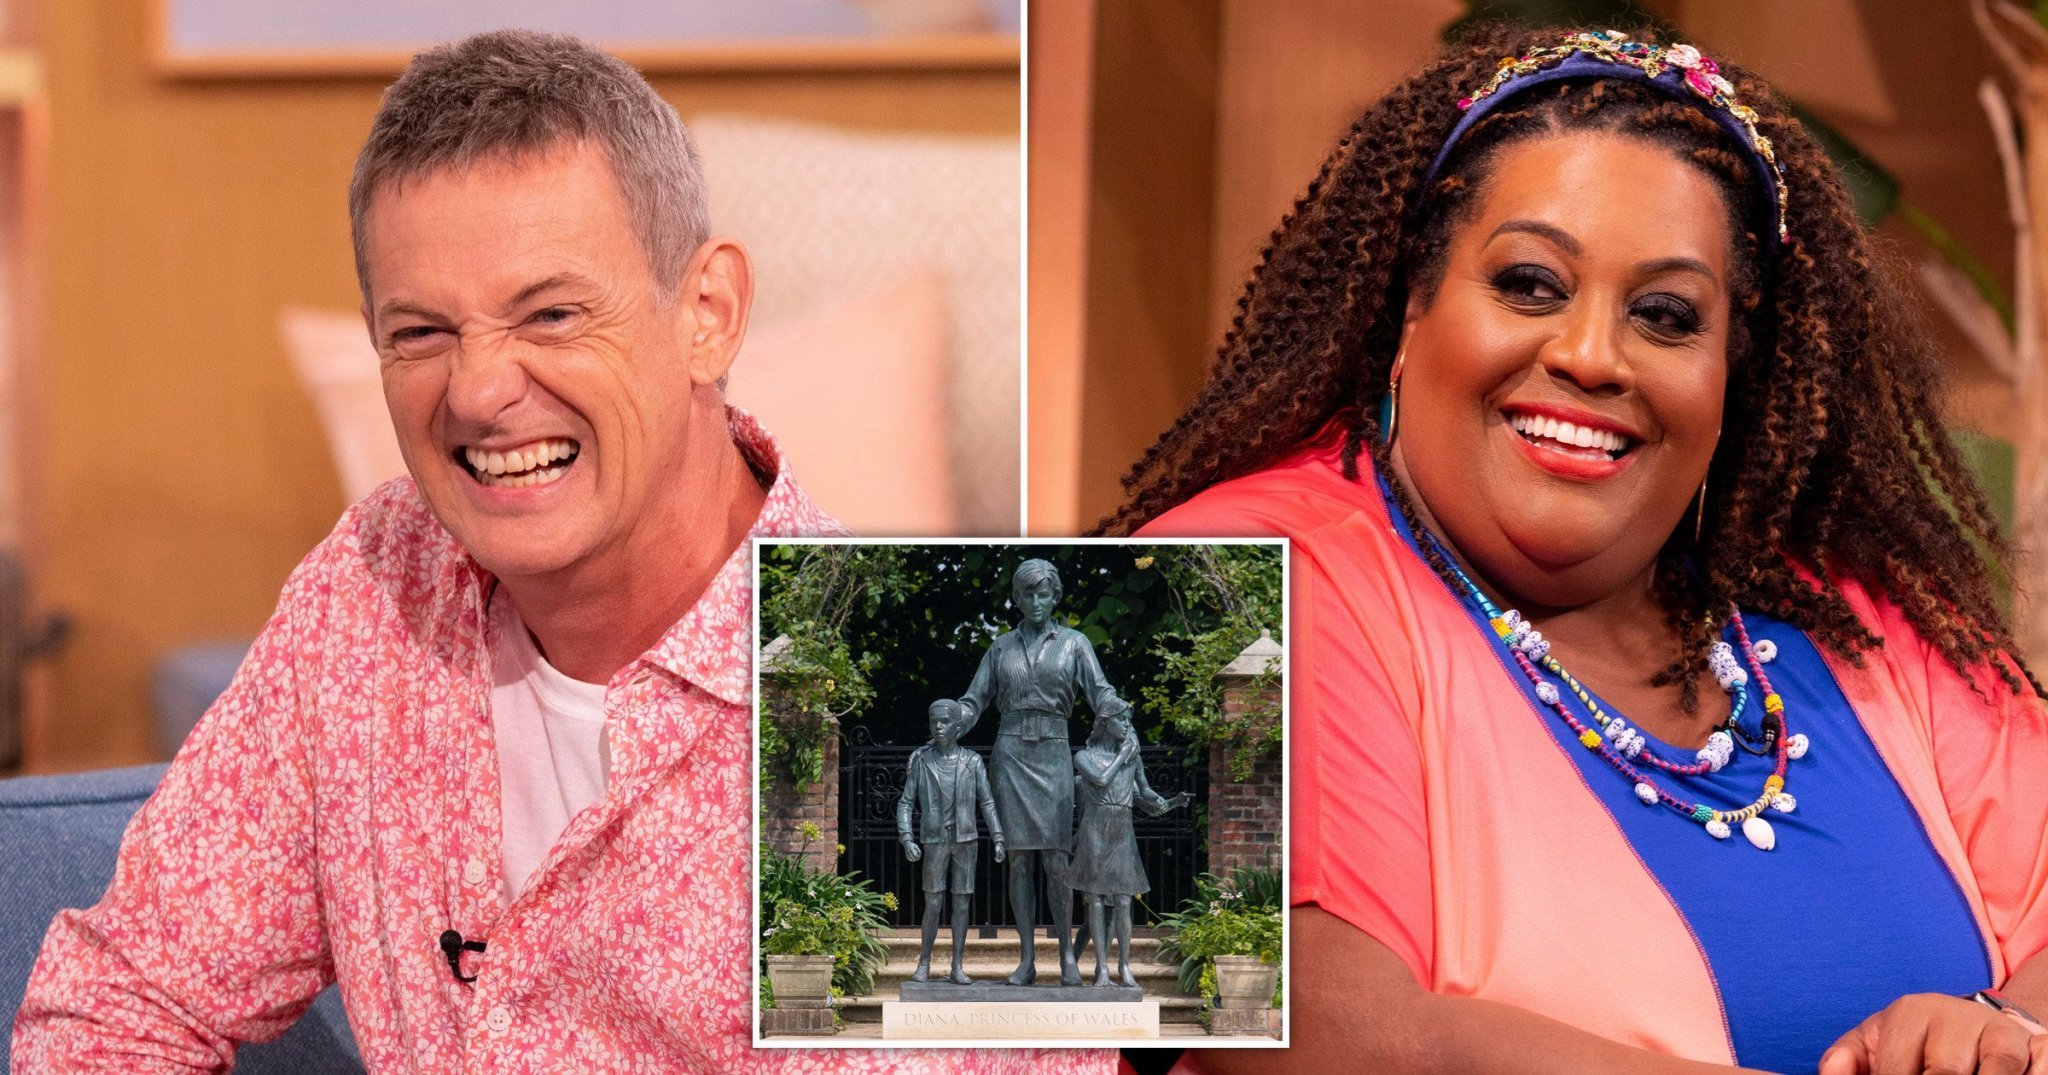 ‘Are you serious?’ Alison Hammond in disbelief at Matthew Wright’s odd criticism of Princess Diana statue